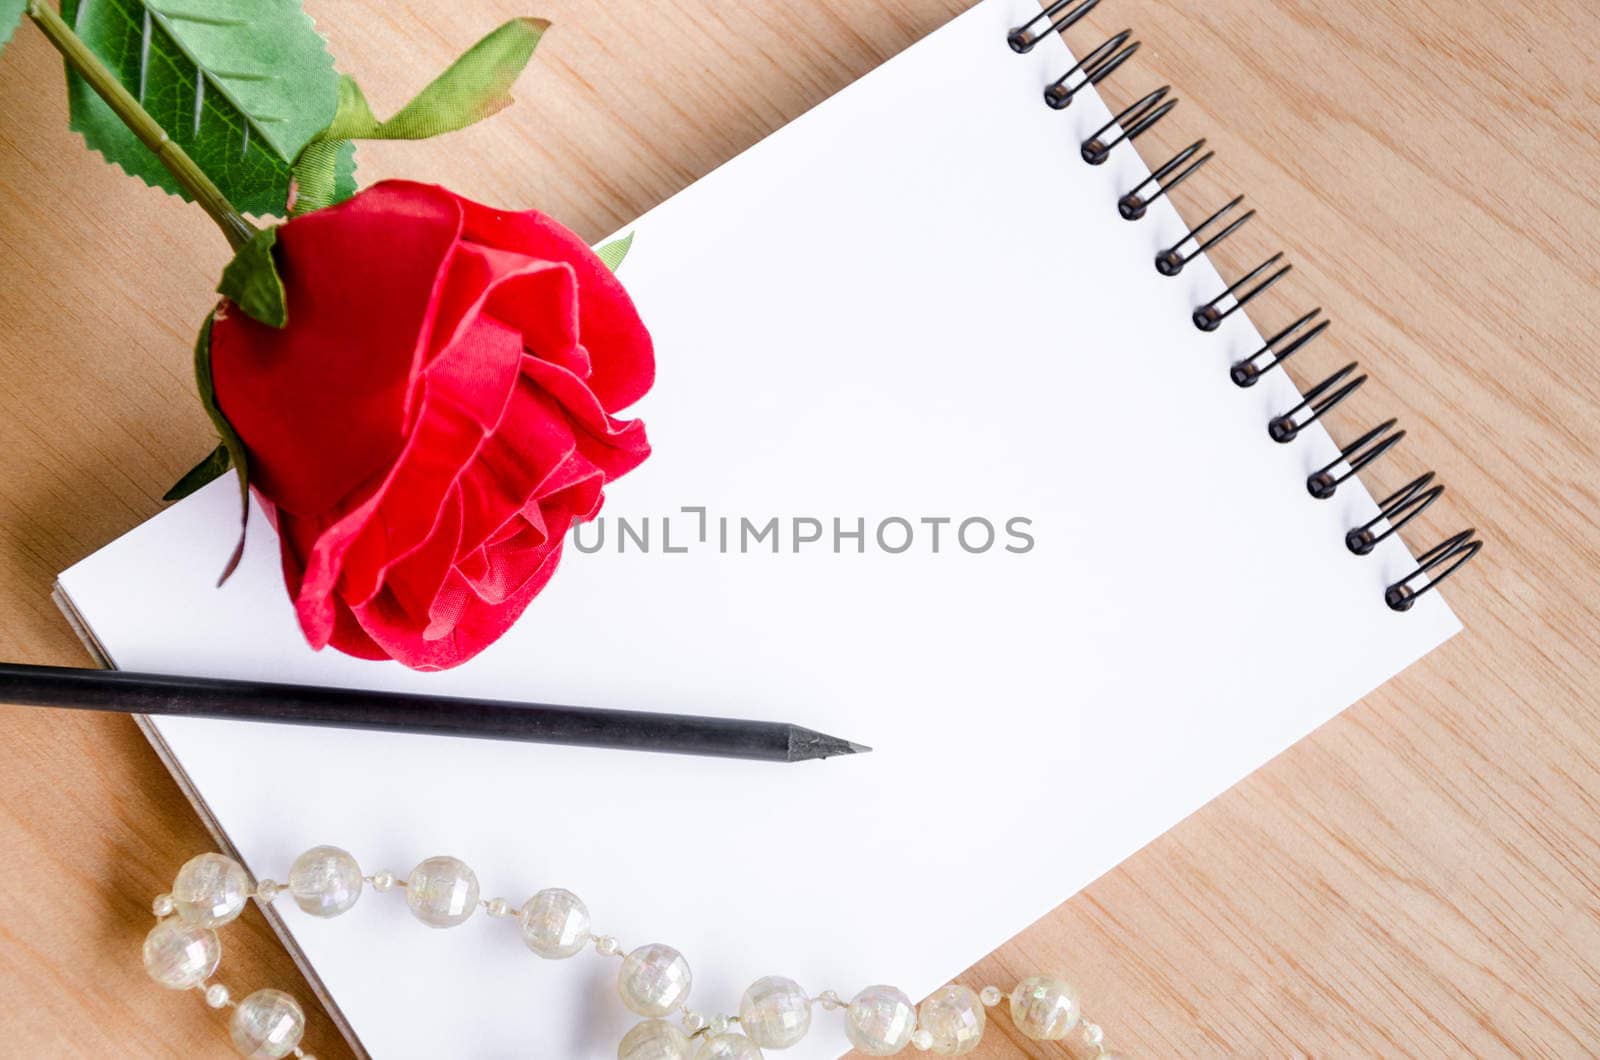 Focus Lovely red rose on a classic note book. on wooden bakcground.